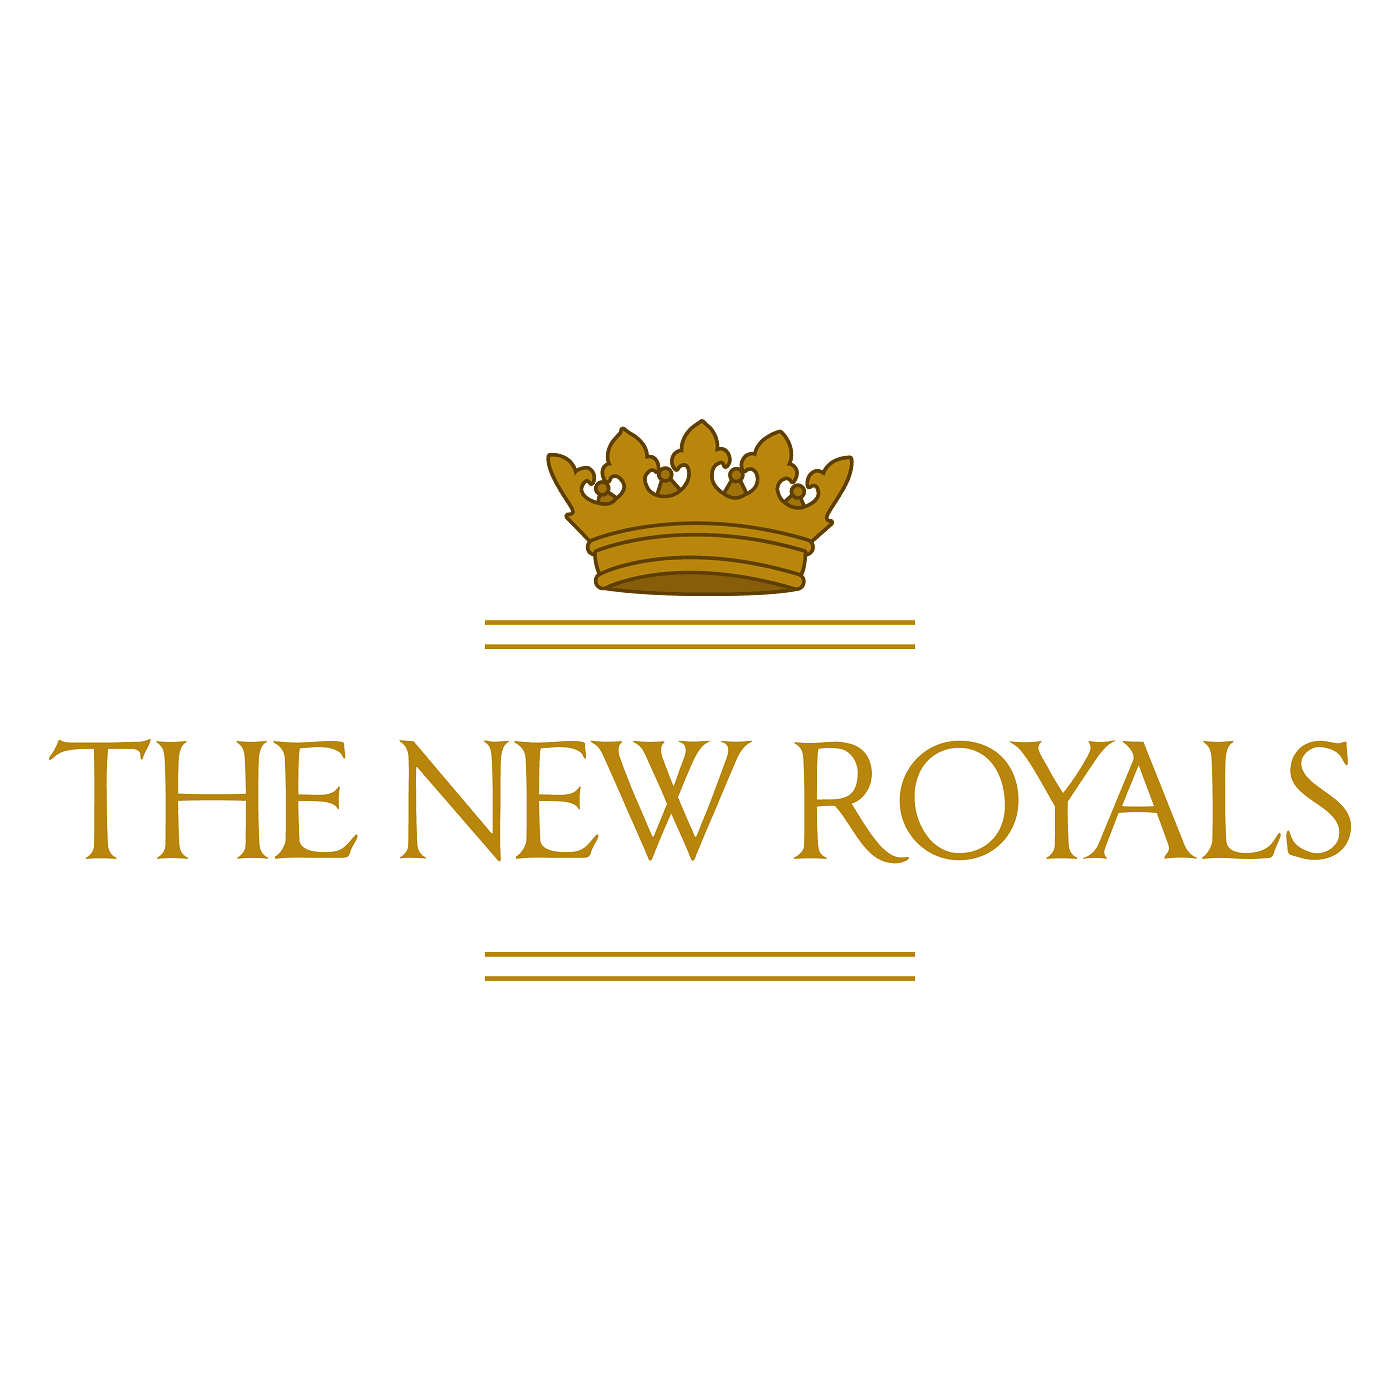 The_New_Royals 横幅